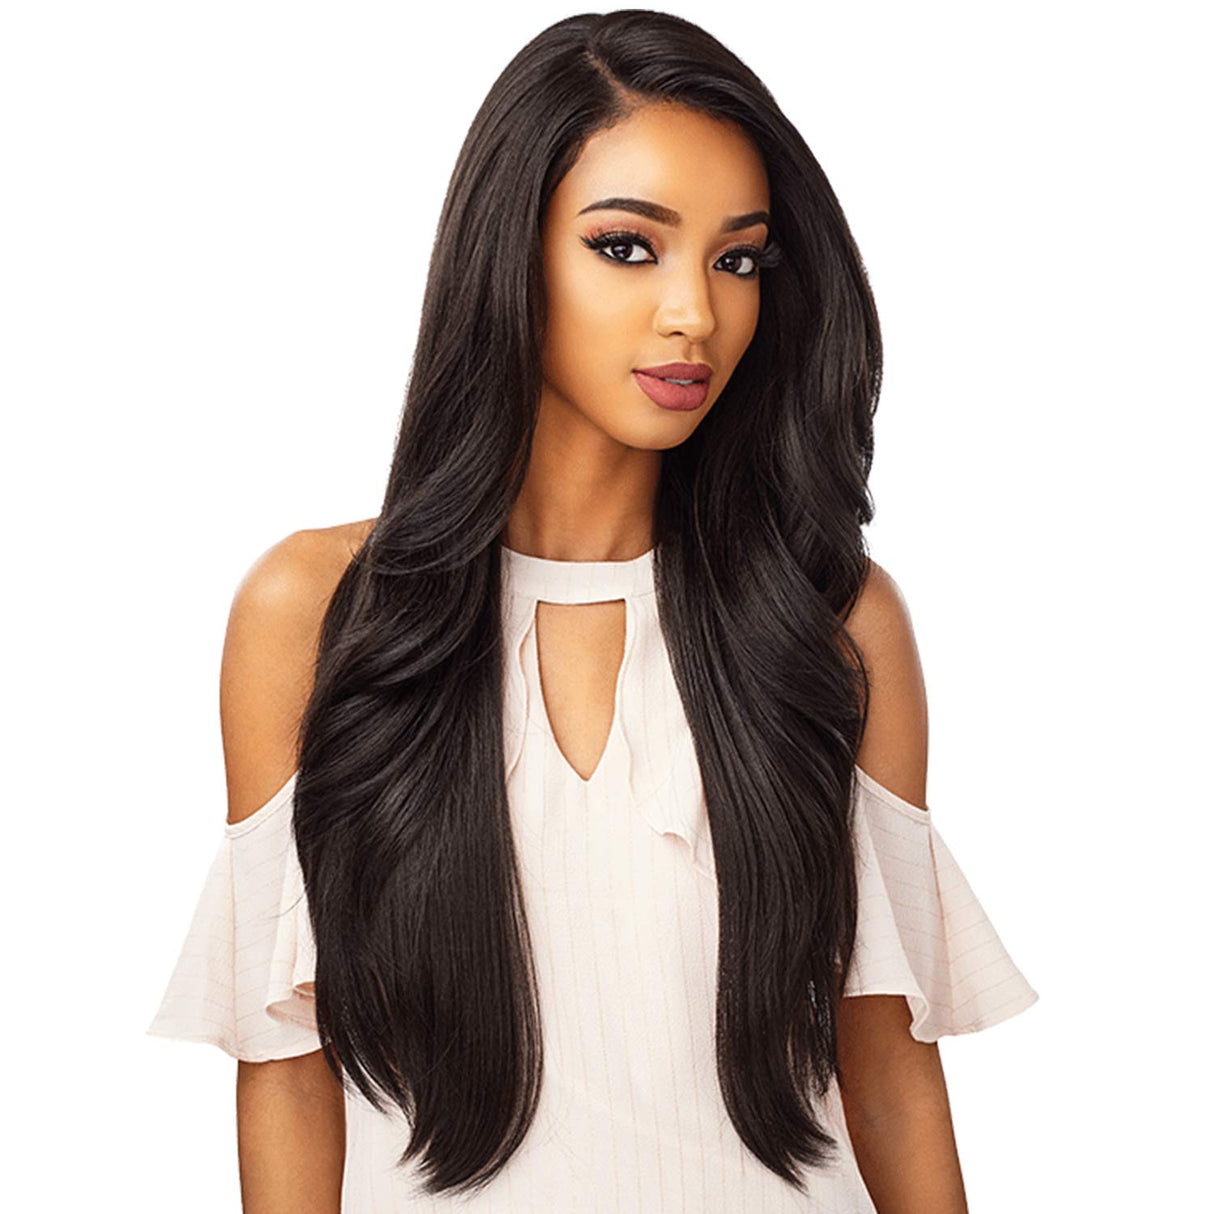 Sensationnel WHAT LACE 13x6 Wigs - Cloud 9 Synthetic Hair Hand Tied Natural Preplucked Hairline Illusion Lace Frontal Lacewig -Whatlace MORGAN (1B) Find Your New Look Today!